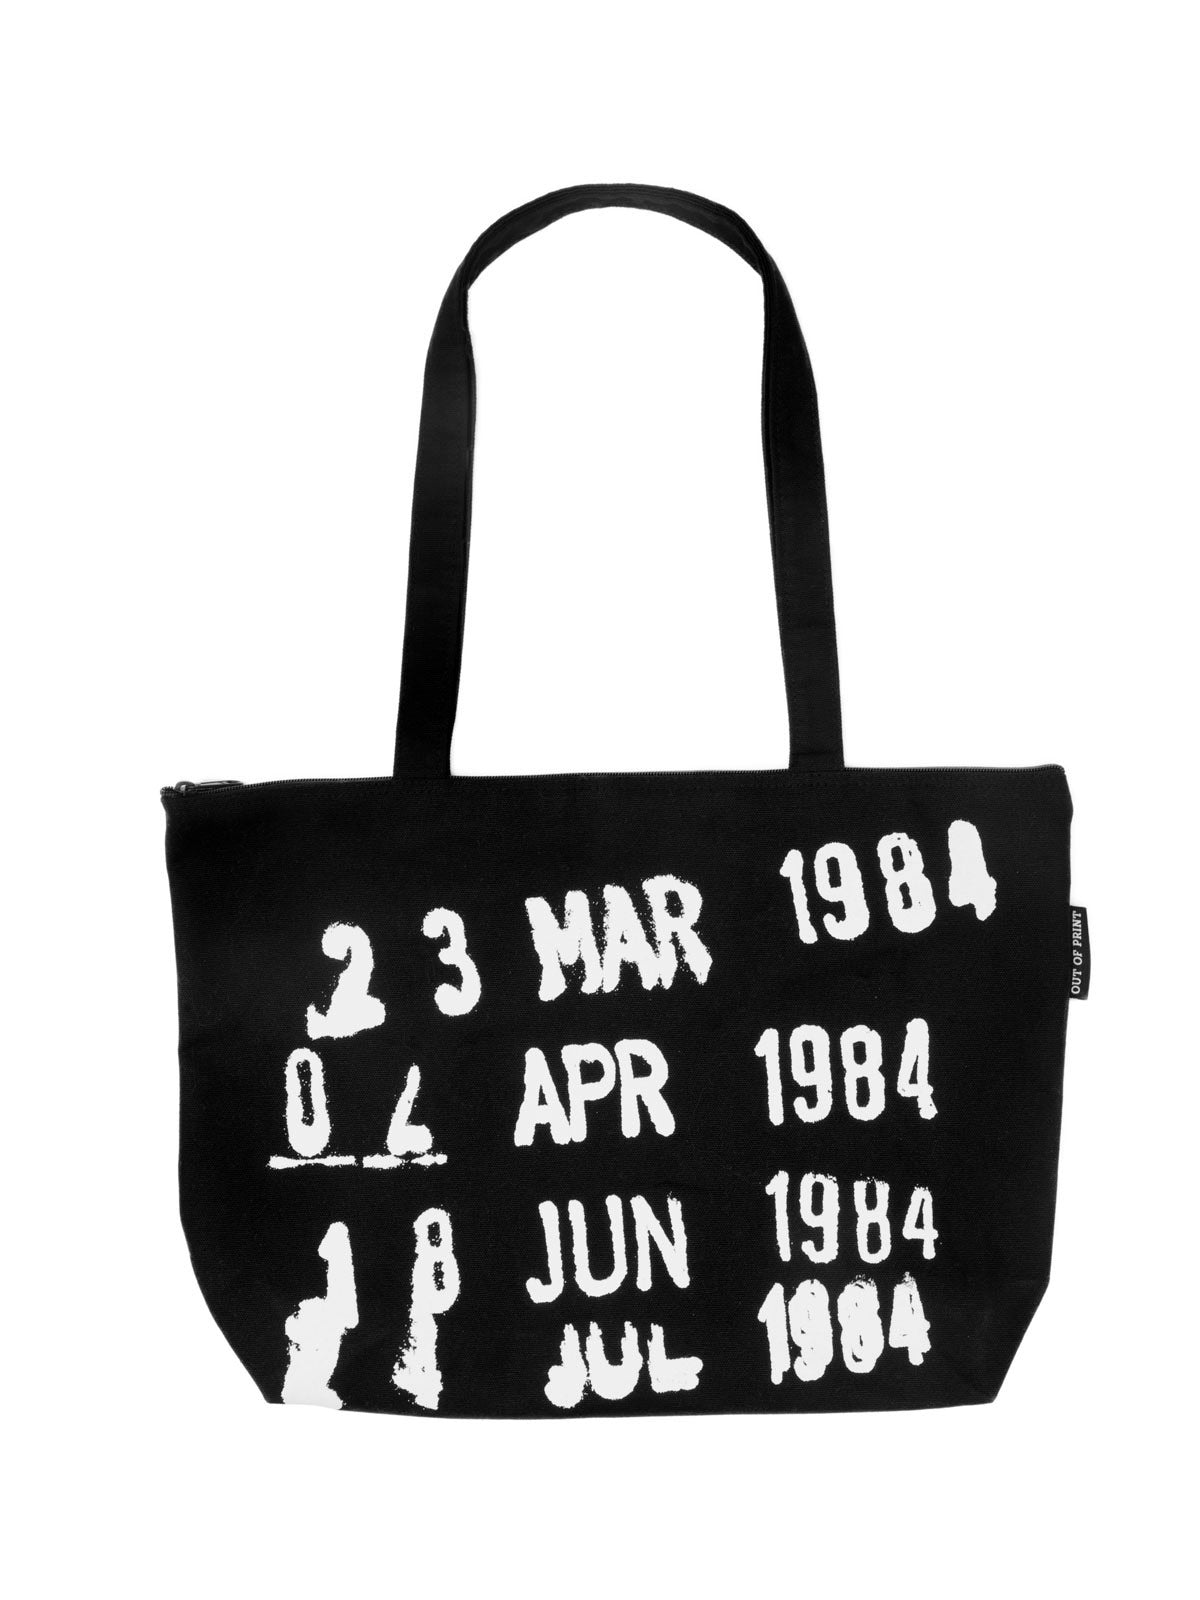 Library Card natural tote bag — Out of Print